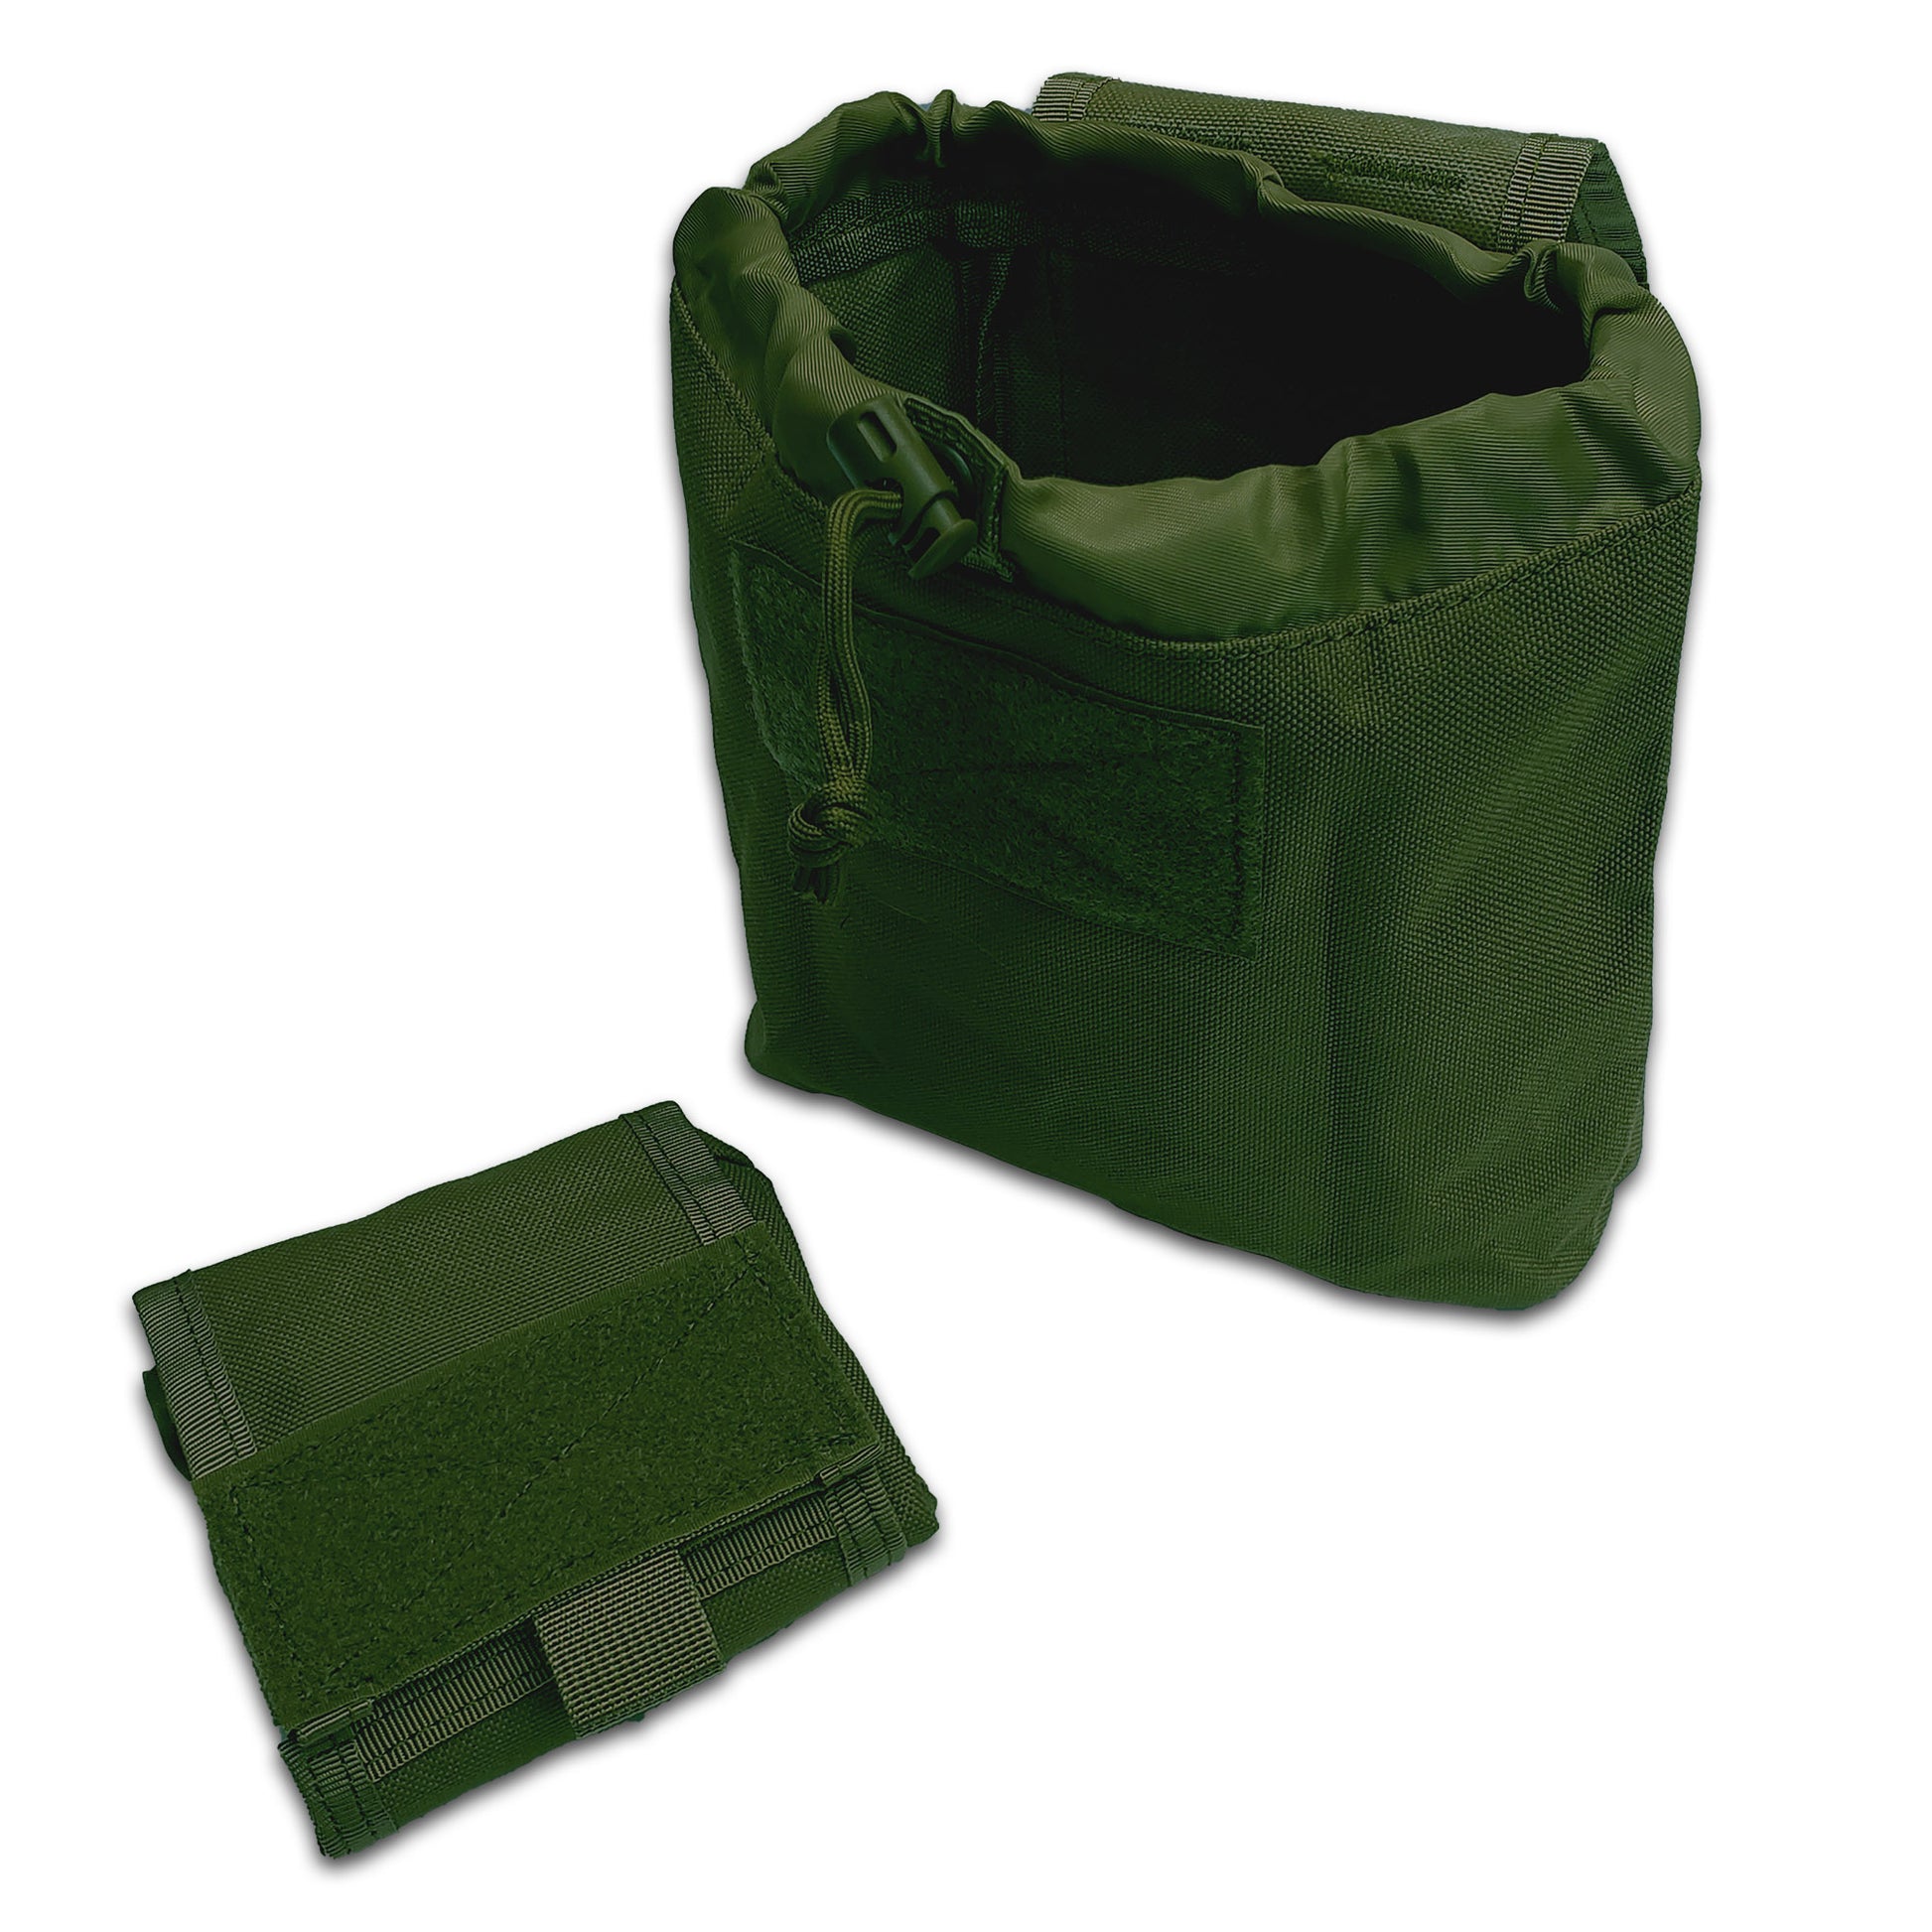 Foldable Canvas Storage Bag, Pocket size, Multi-Purpose Foraging Pouch for Flowers, Adult Unisex, Size: One size, Green